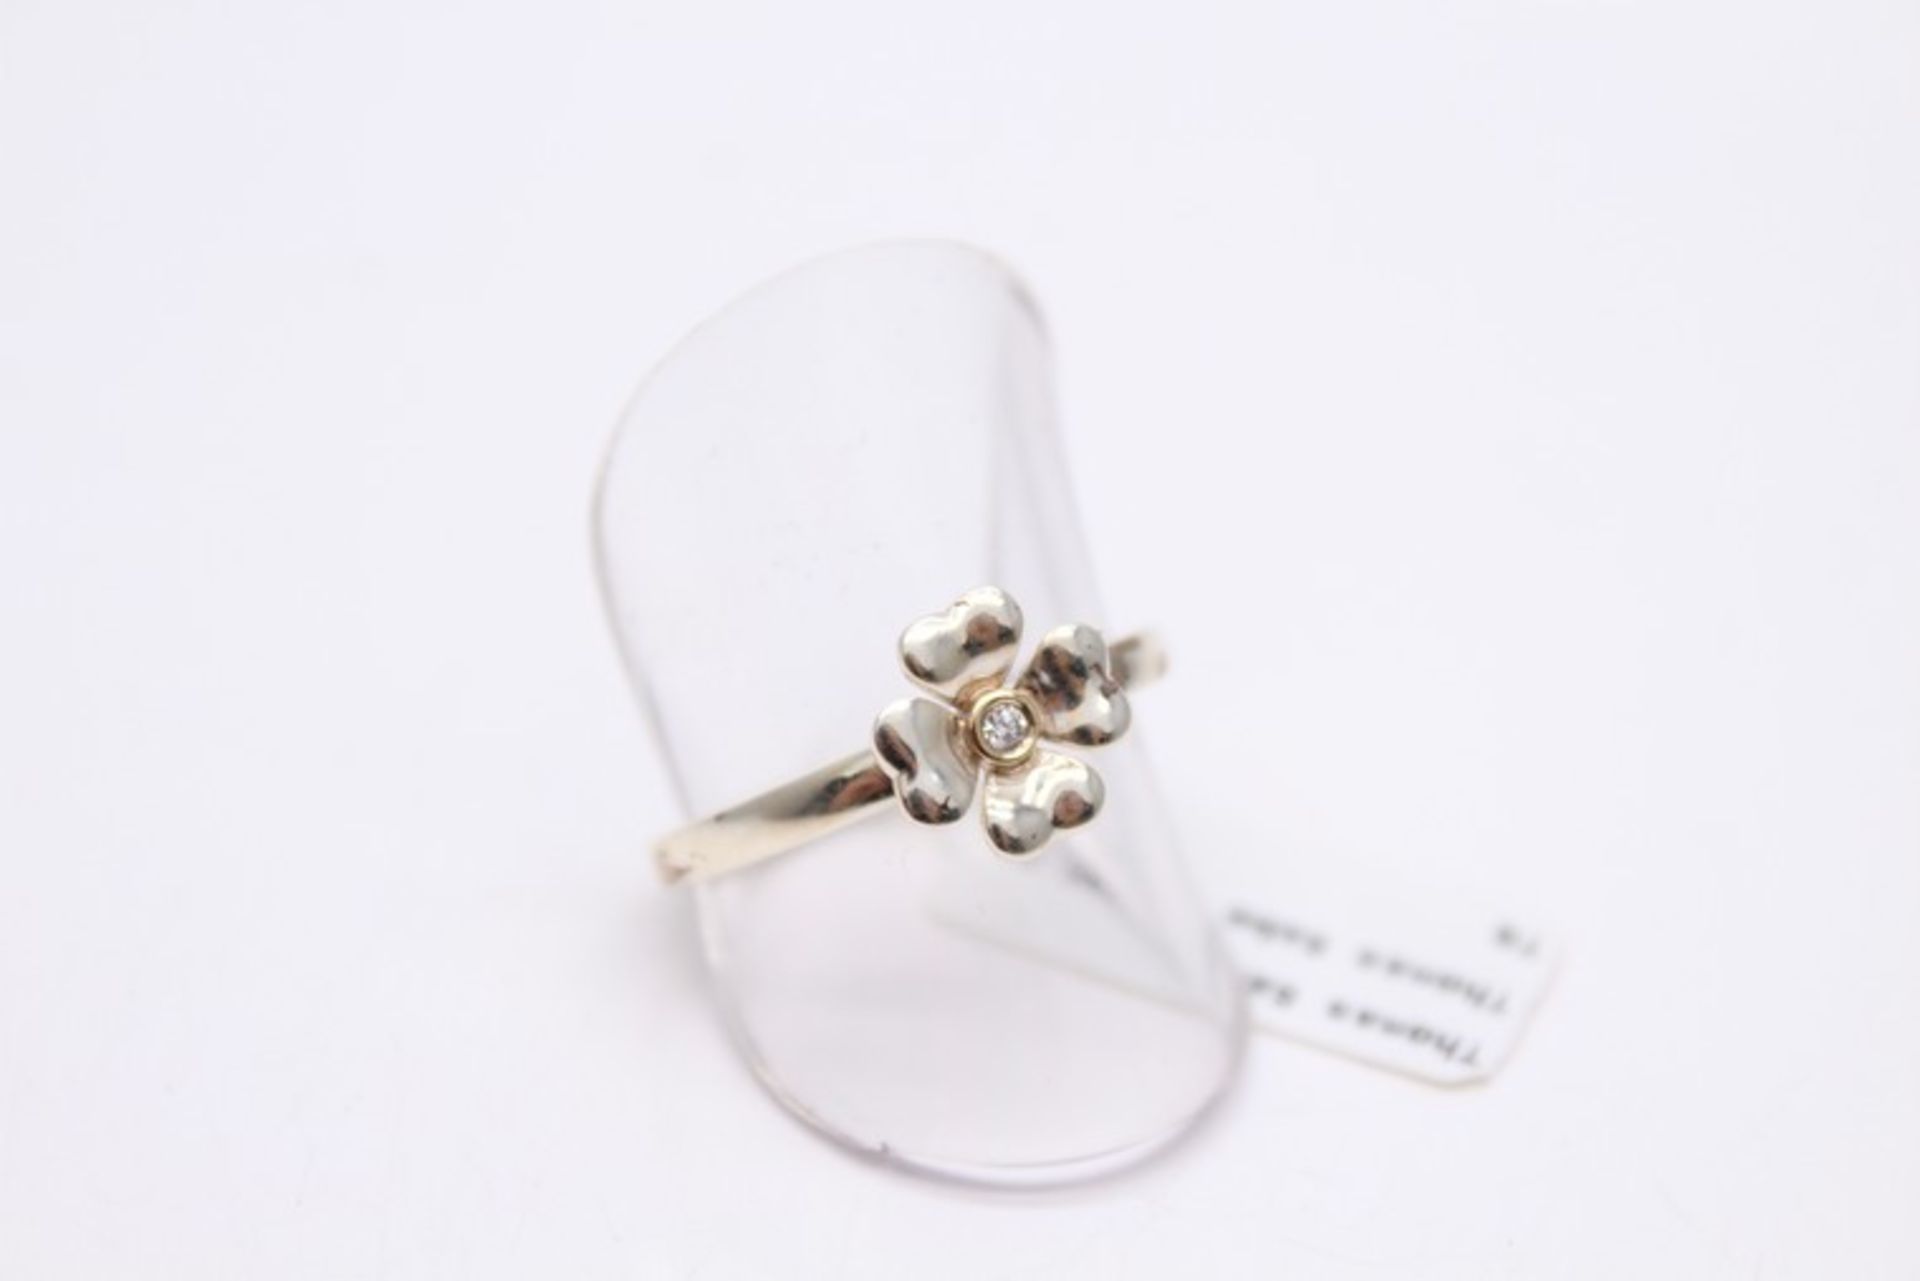 1 x BOXED BRAND NEW THOMAS SARBO FLOWER RING RRP £150 *PLEASE NOTE THAT THE BID PRICE IS